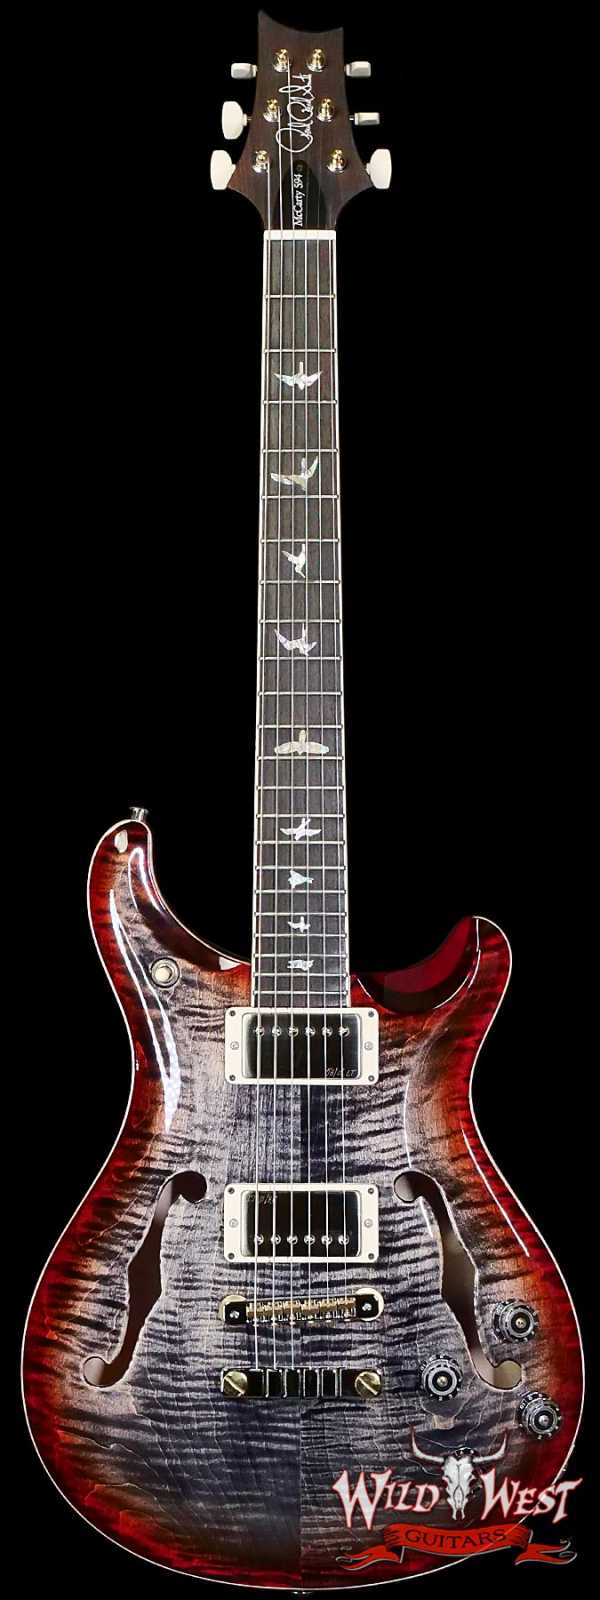 Paul Reed Smith PRS Core Series McCarty 594 Hollowbody II HBII594 Rosewood Fingerboard Charcoal Cherry Burst 5.75 LBS